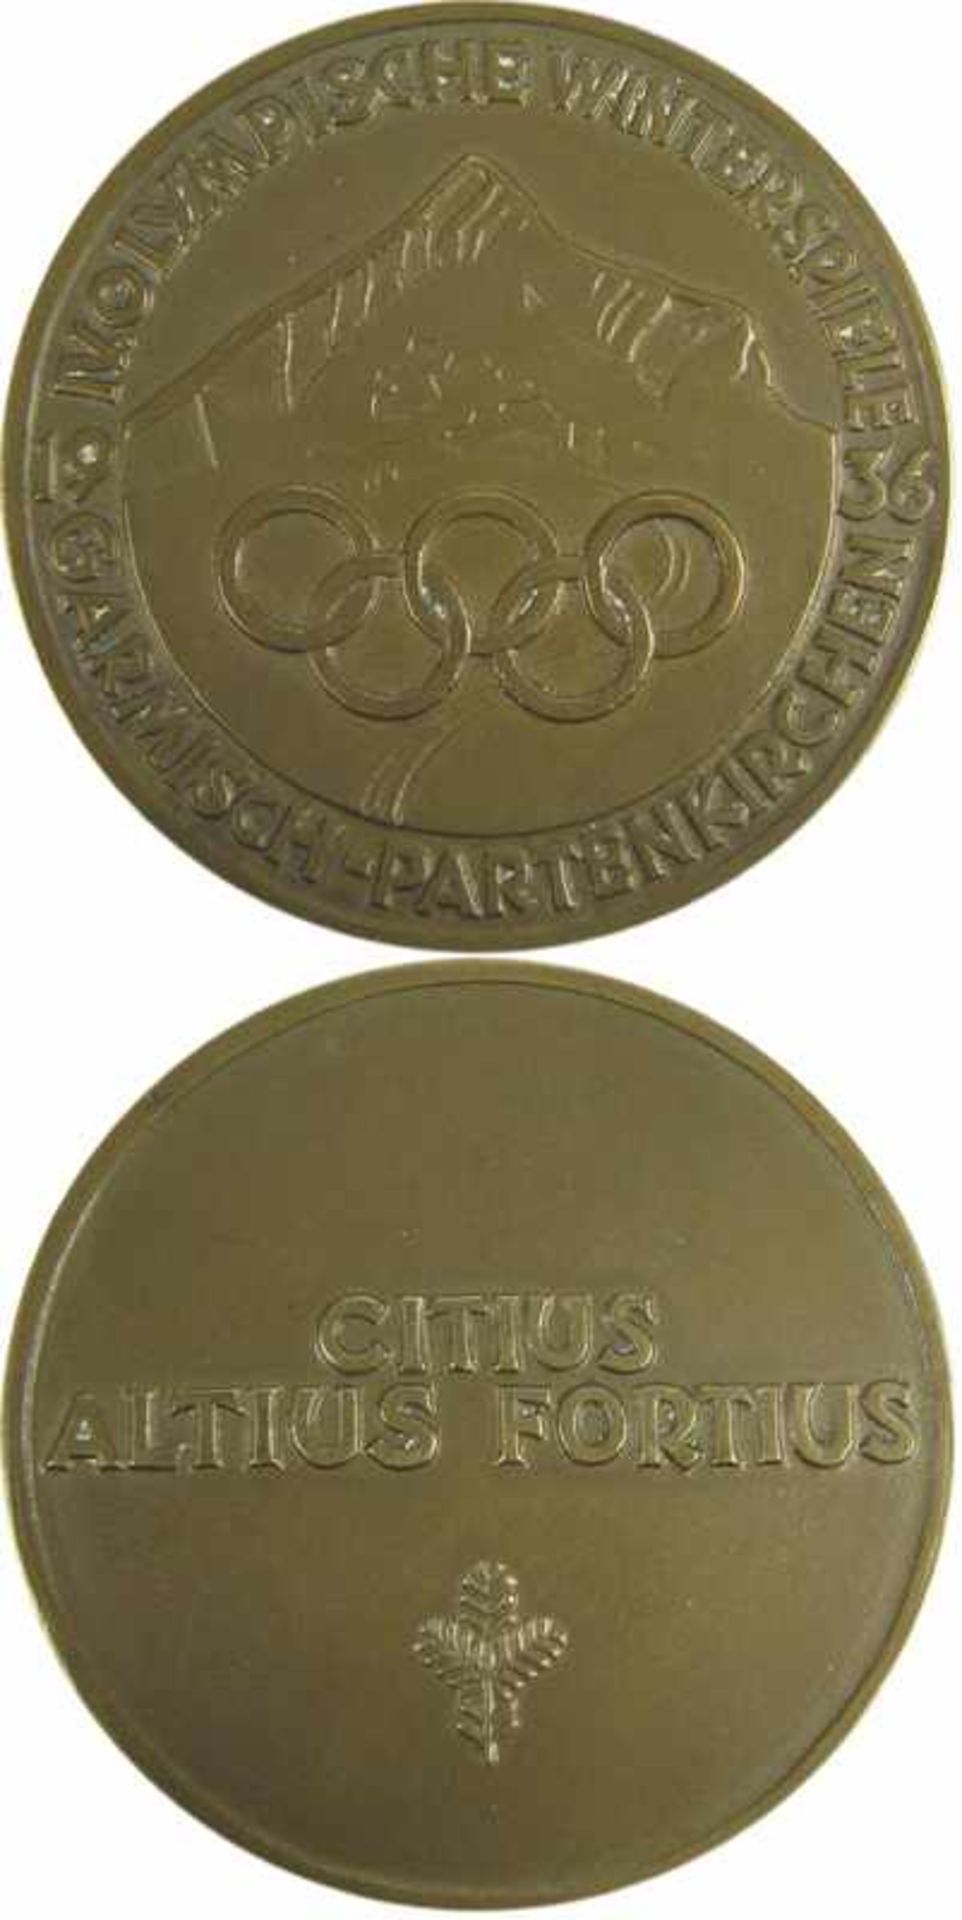 Olympic Winter games 1936. Official Participation - medal from the Olympic Winter Games in